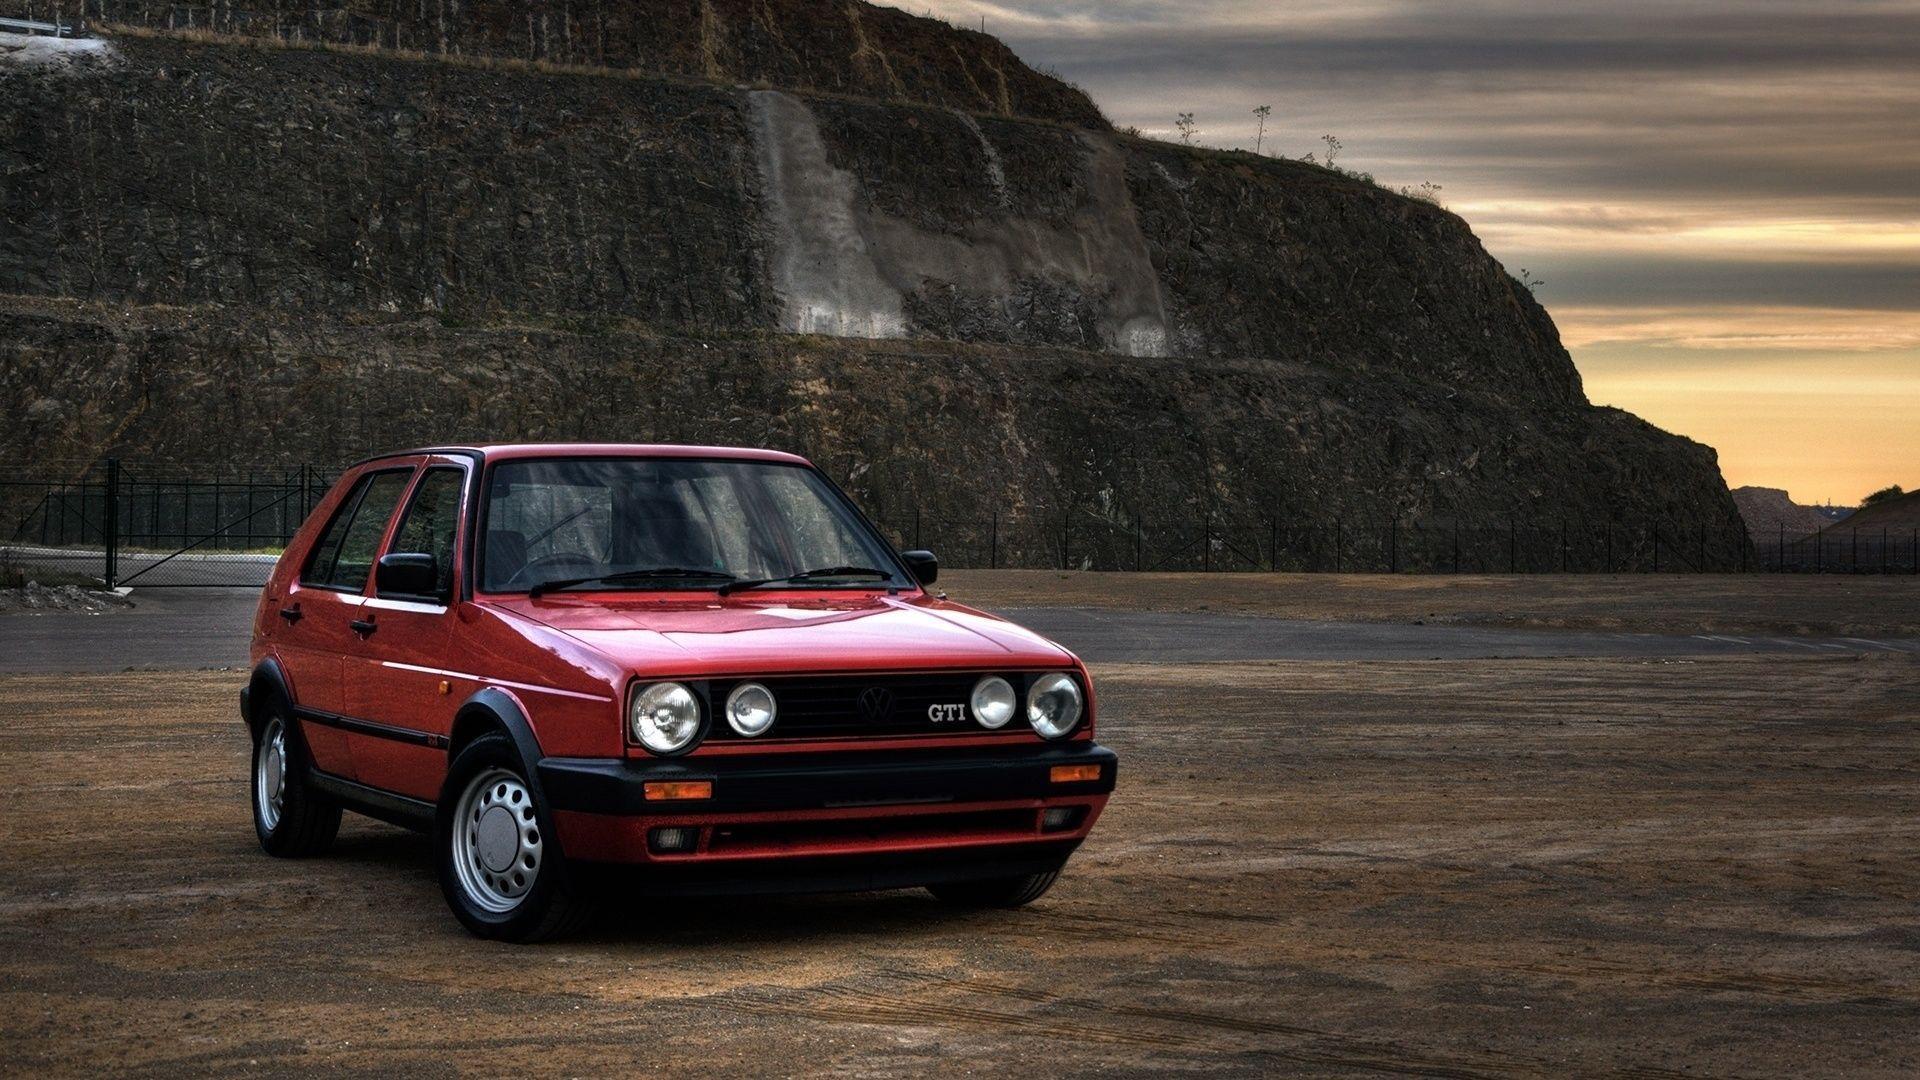 Vw, Cars, Wallpapers Auto, Wallpapers Auto, Classic